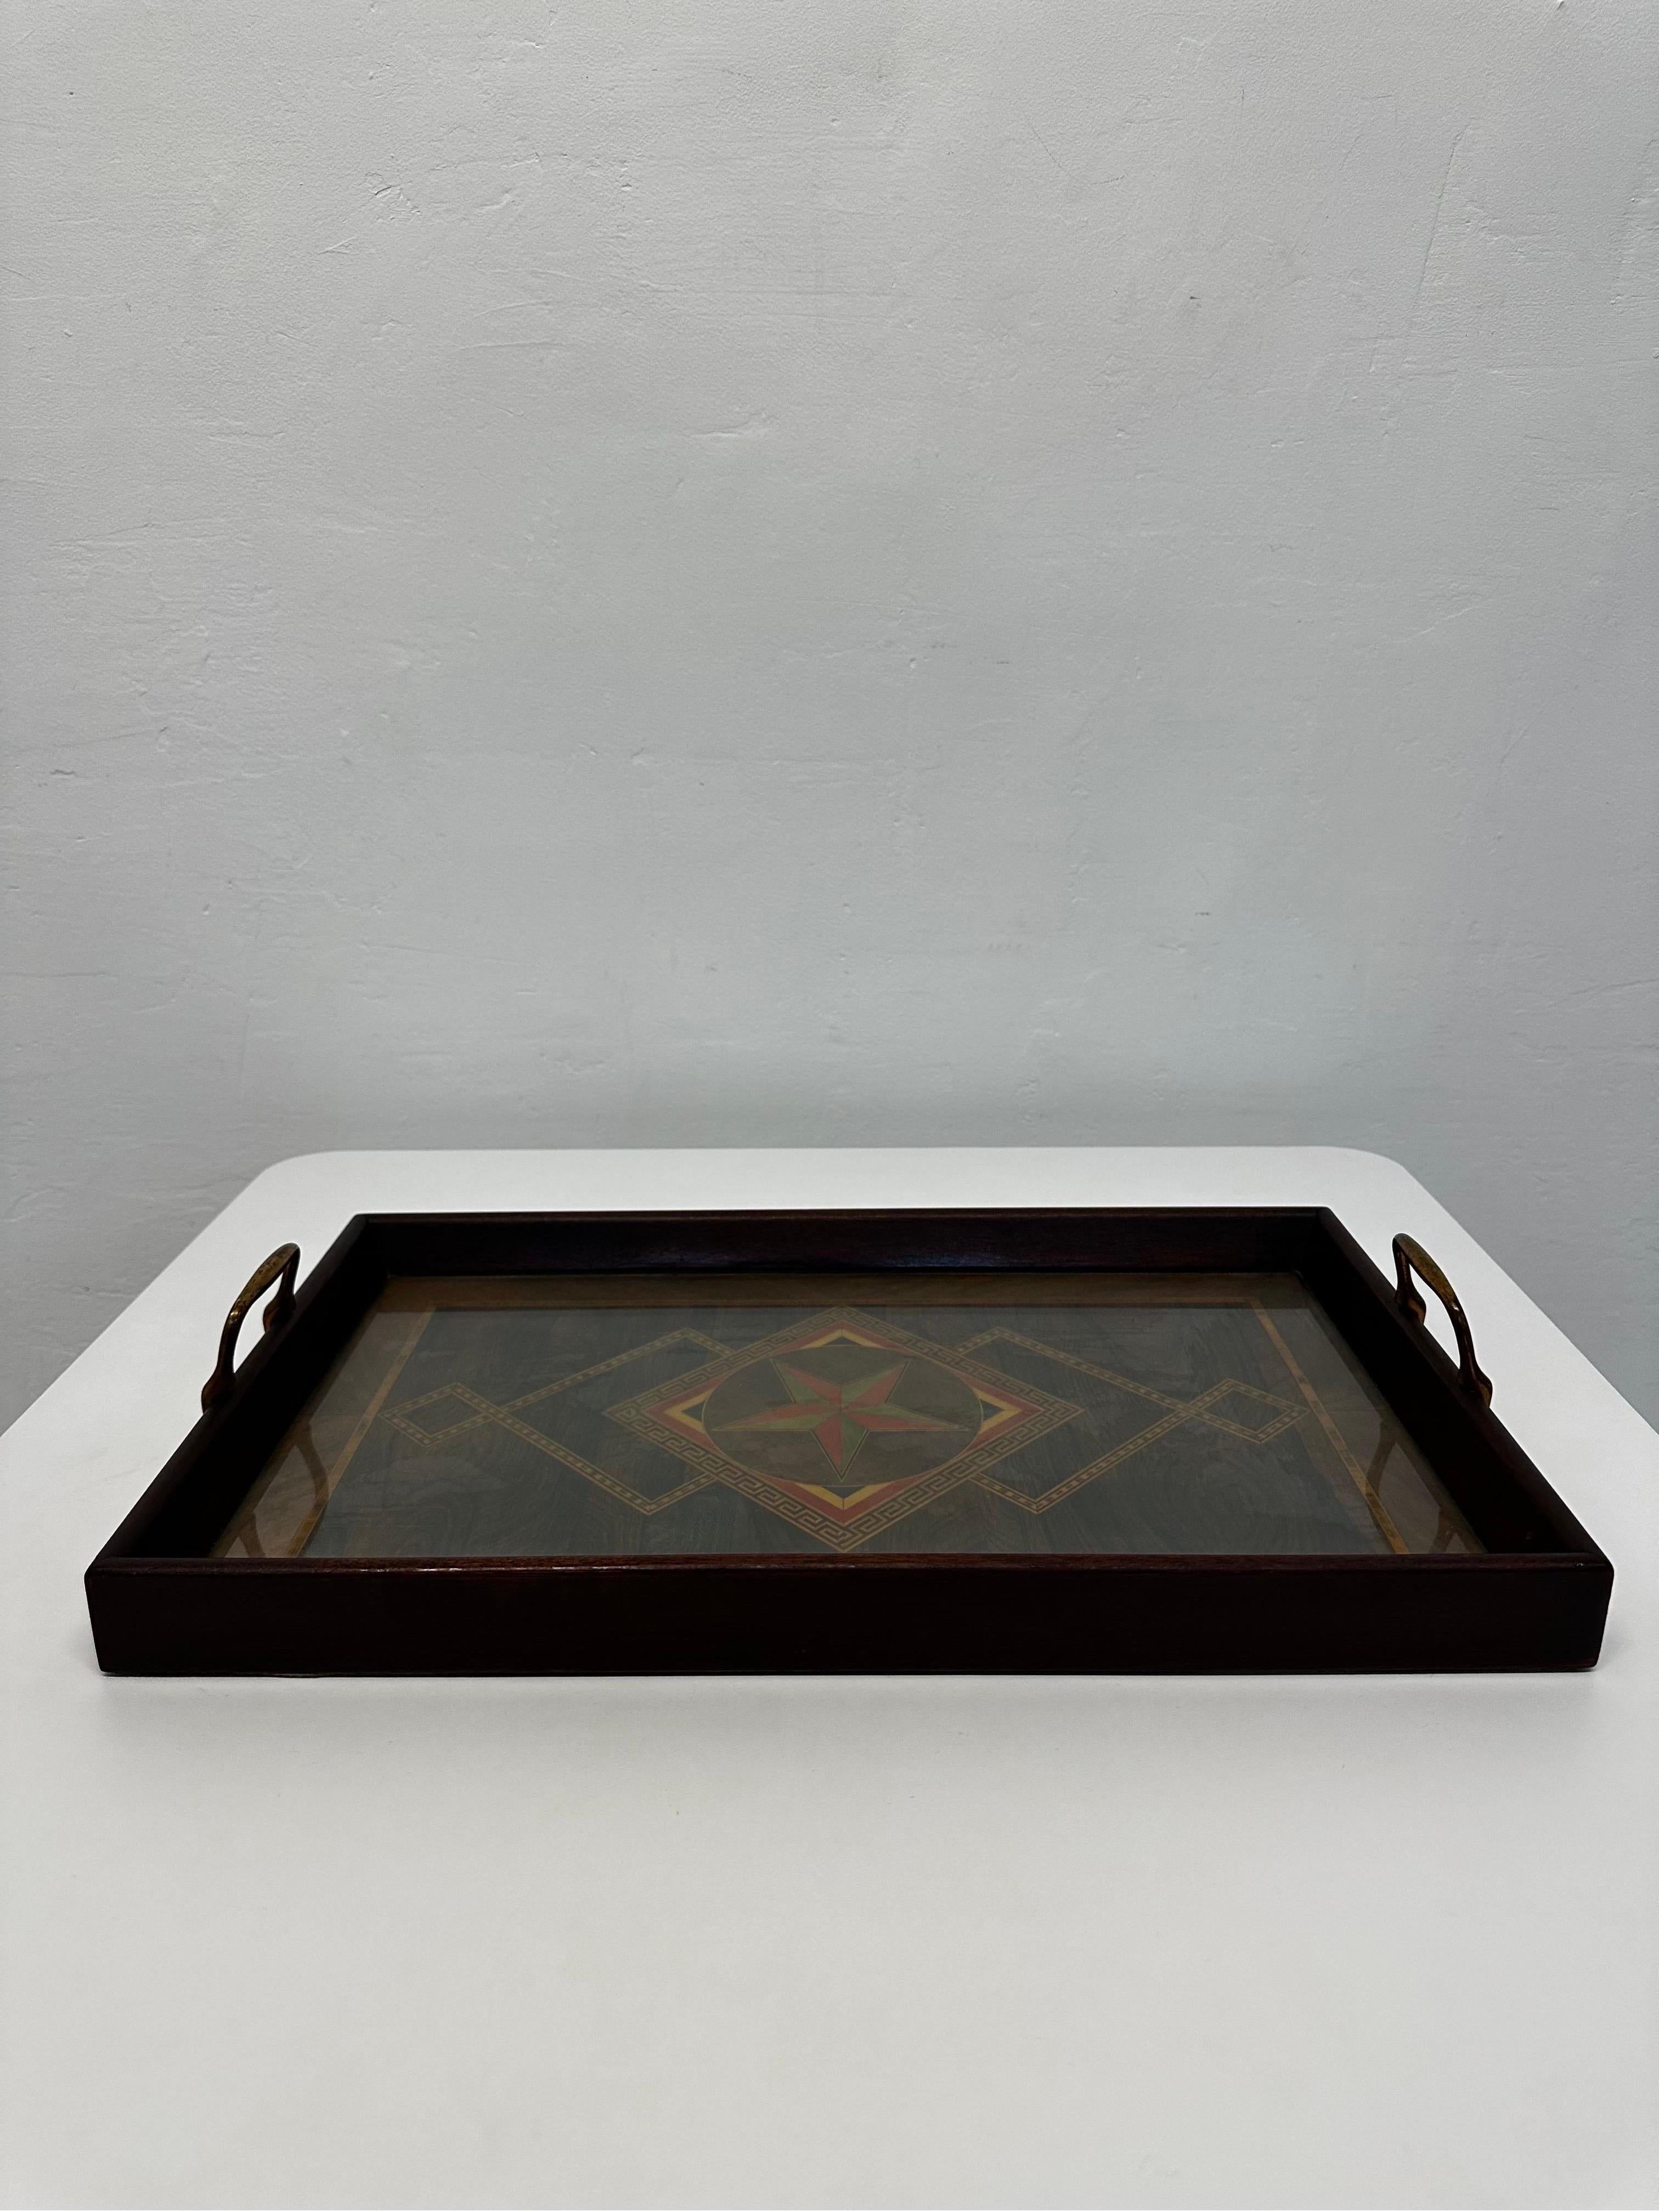 Art Deco wood inlay under glass serving tray with patinated brass handles by Herman J Oeser, 1922.